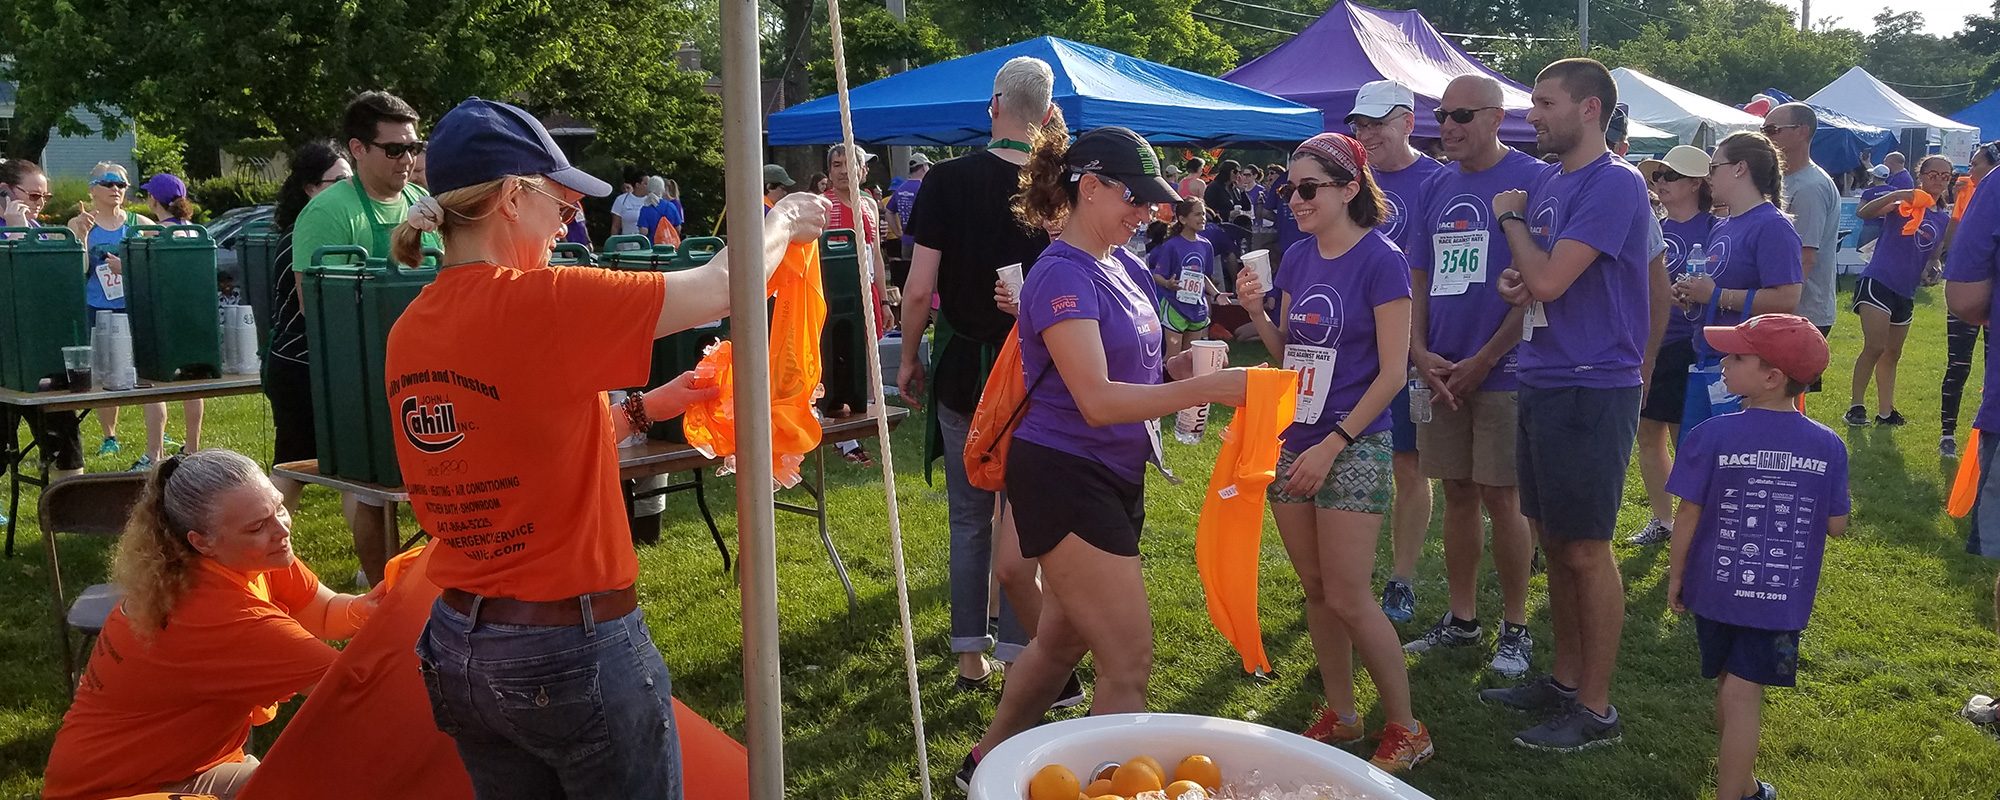 Several people wearing John J. Cahill Inc. shirts at a community event representing the company's community involvement in Evanston, IL